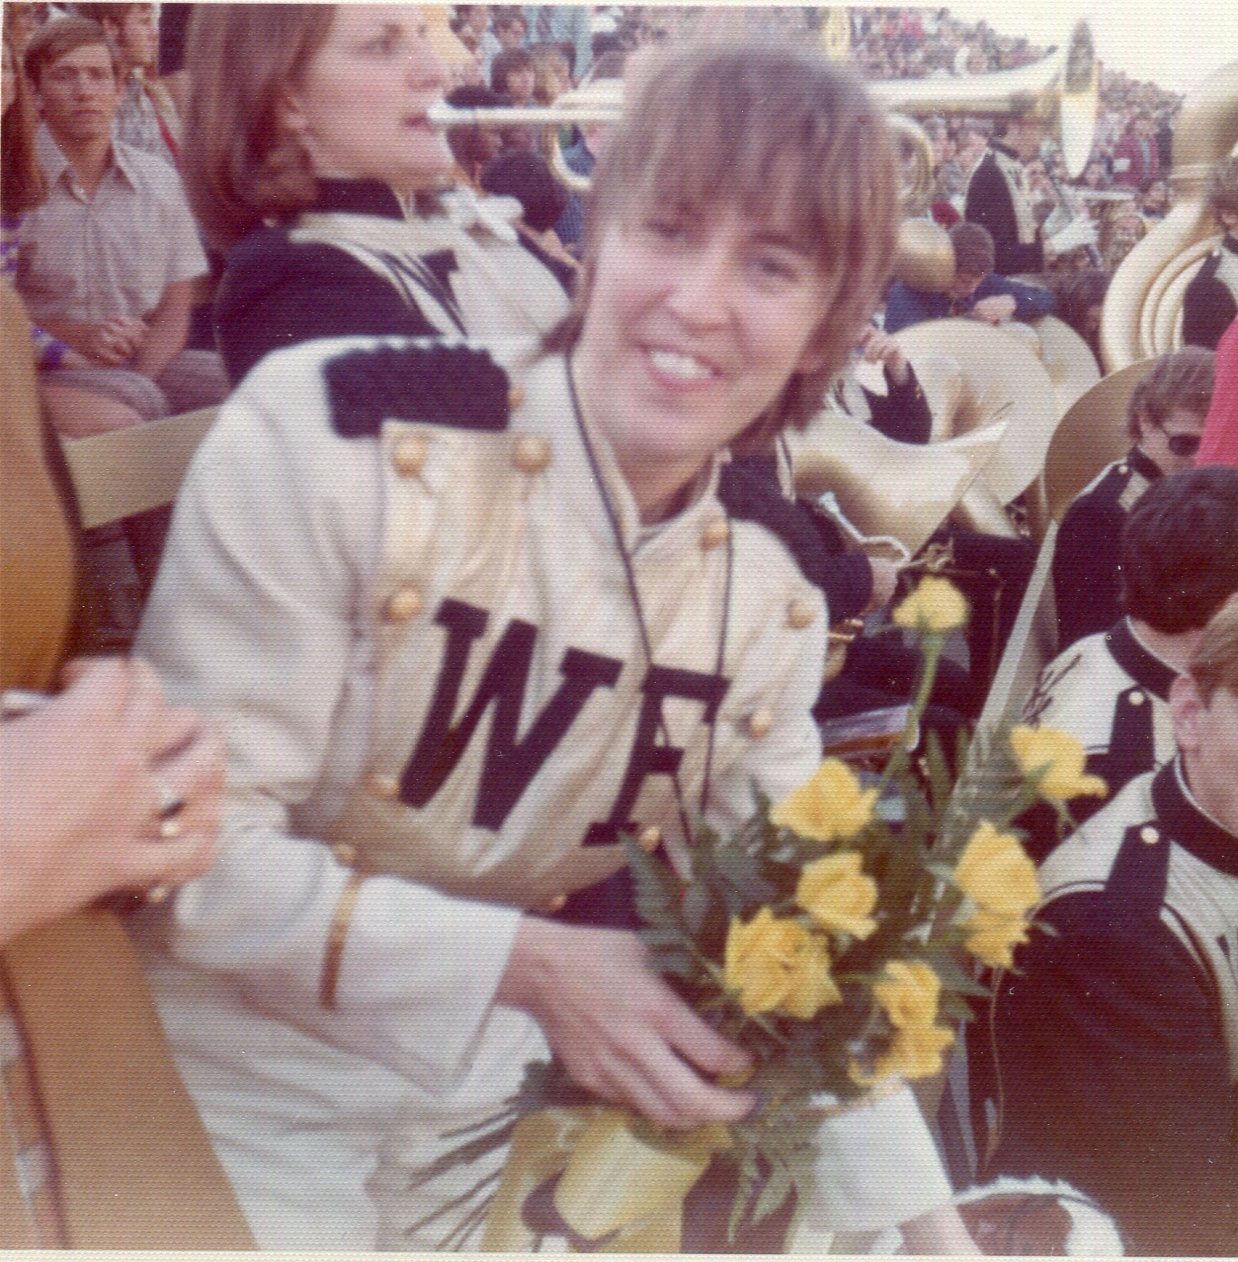 President Scales presented yellow roses to Pam Key at her last game as drum major.